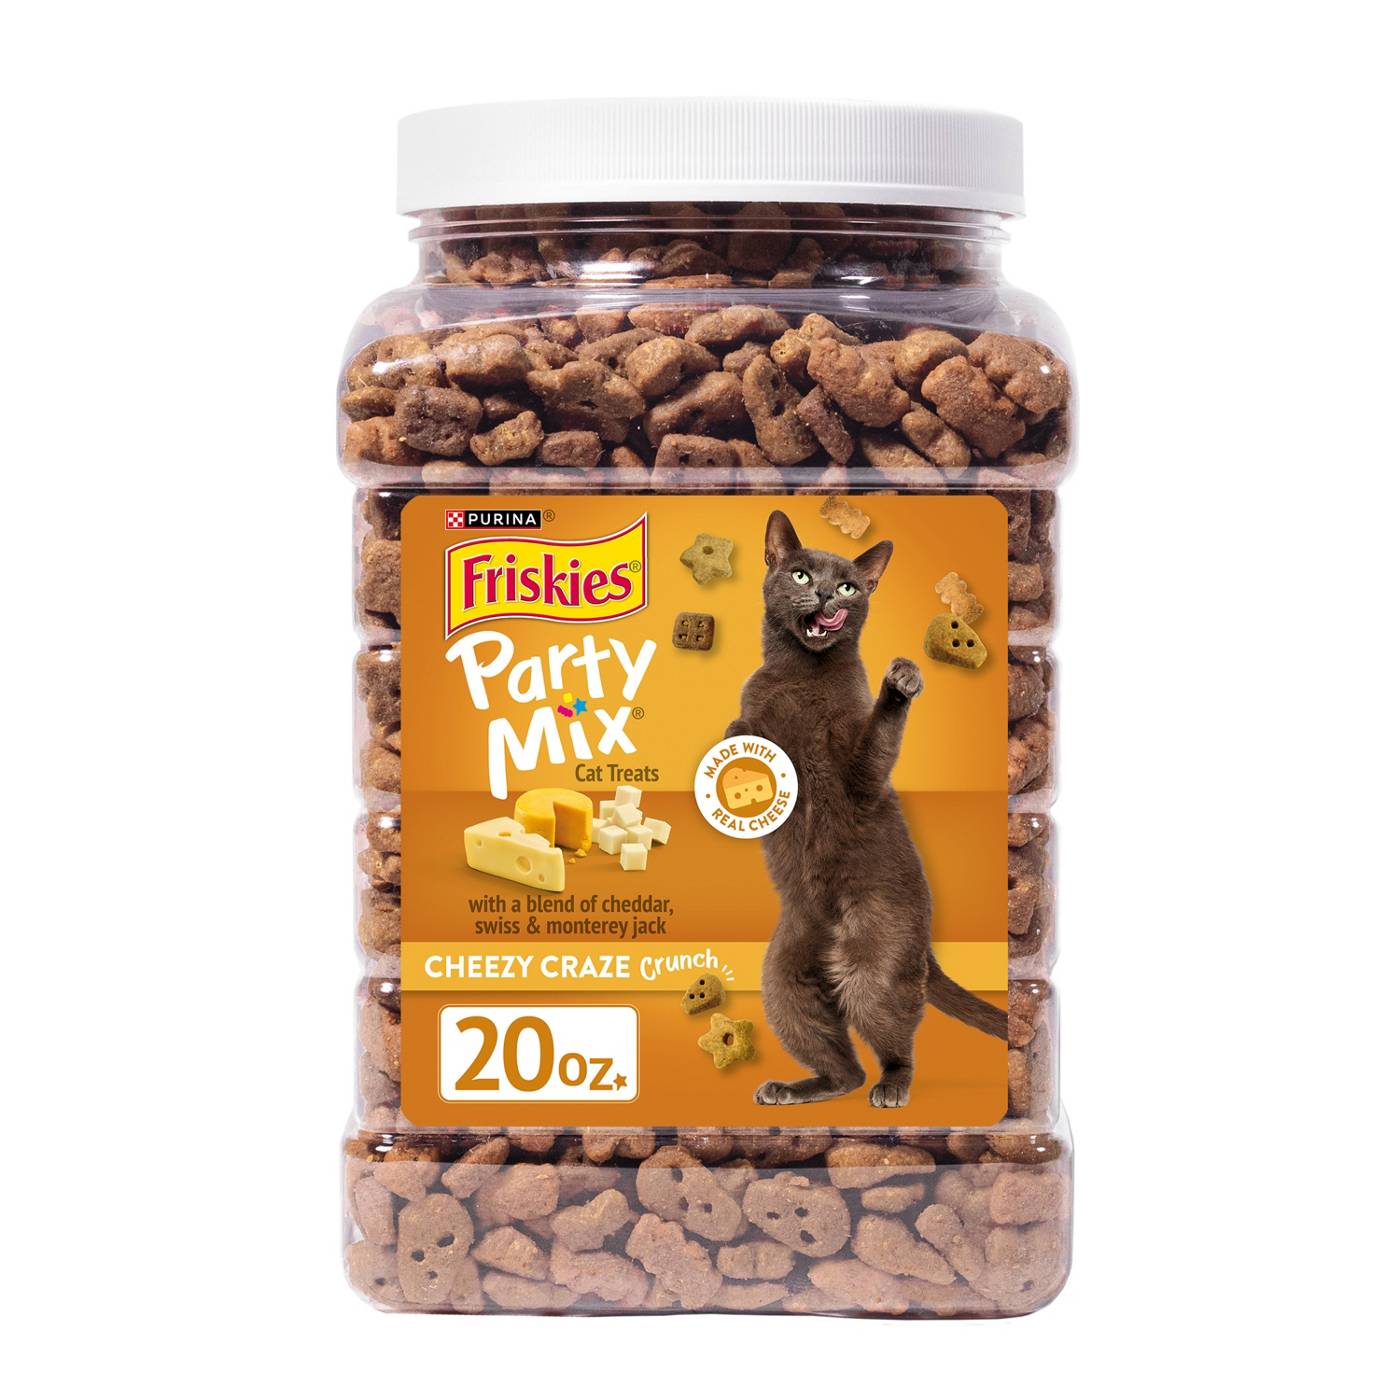 Friskies Purina Friskies Made in USA Facilities Cat Treats, Party Mix Cheezy Craze Crunch; image 1 of 2